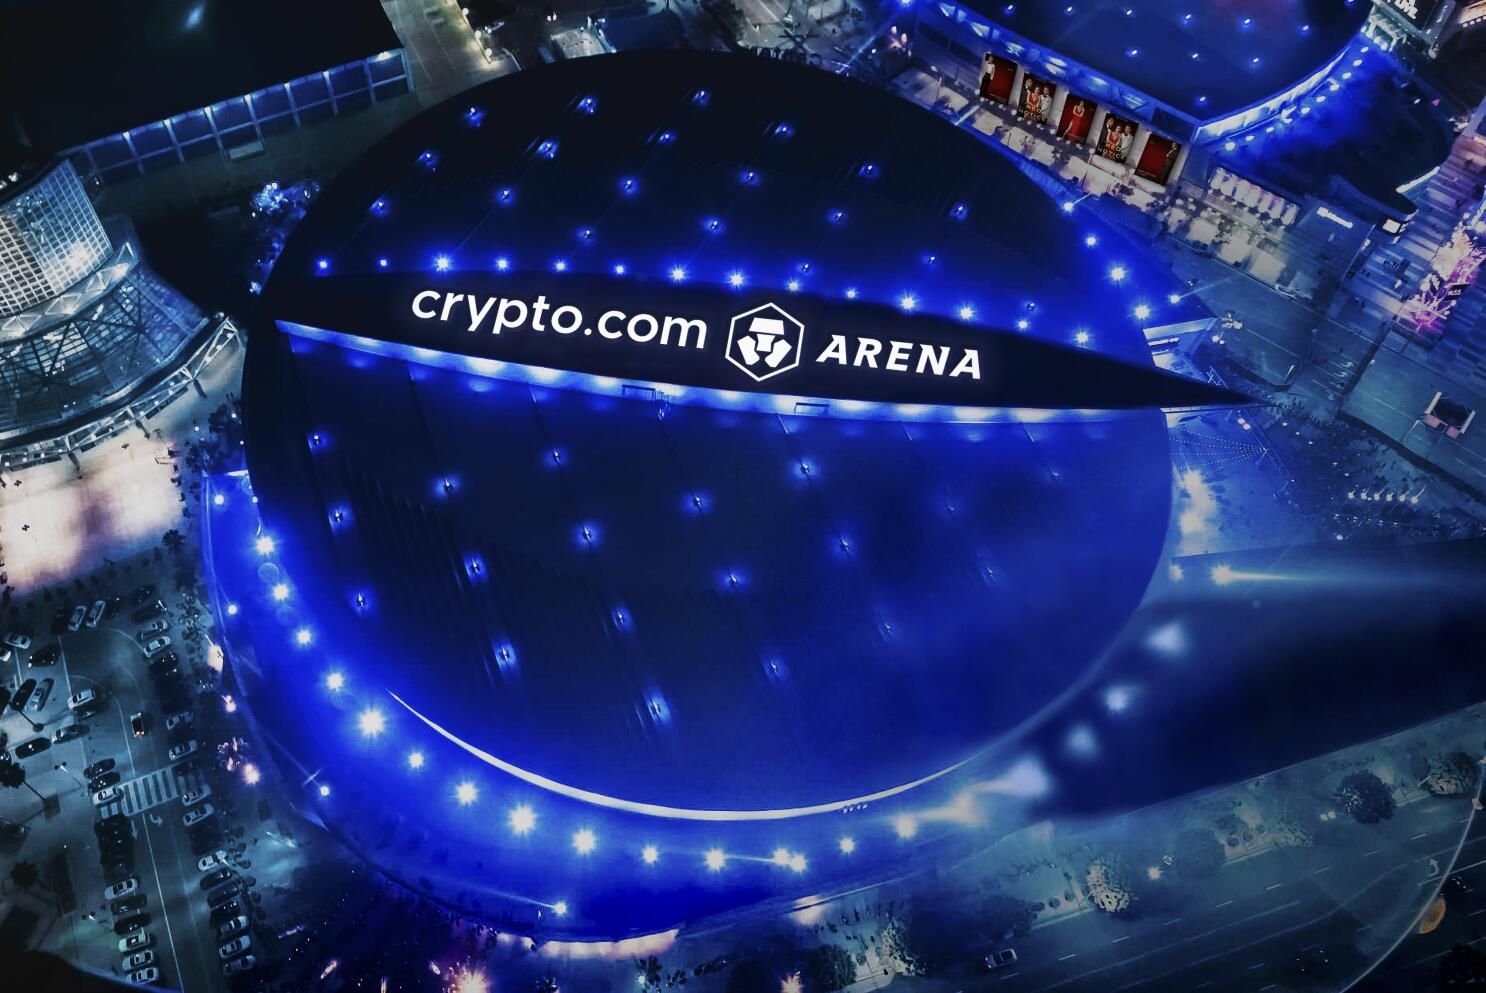 Staples Center in L.A. to Be Renamed Crypto.com Arena - WSJ